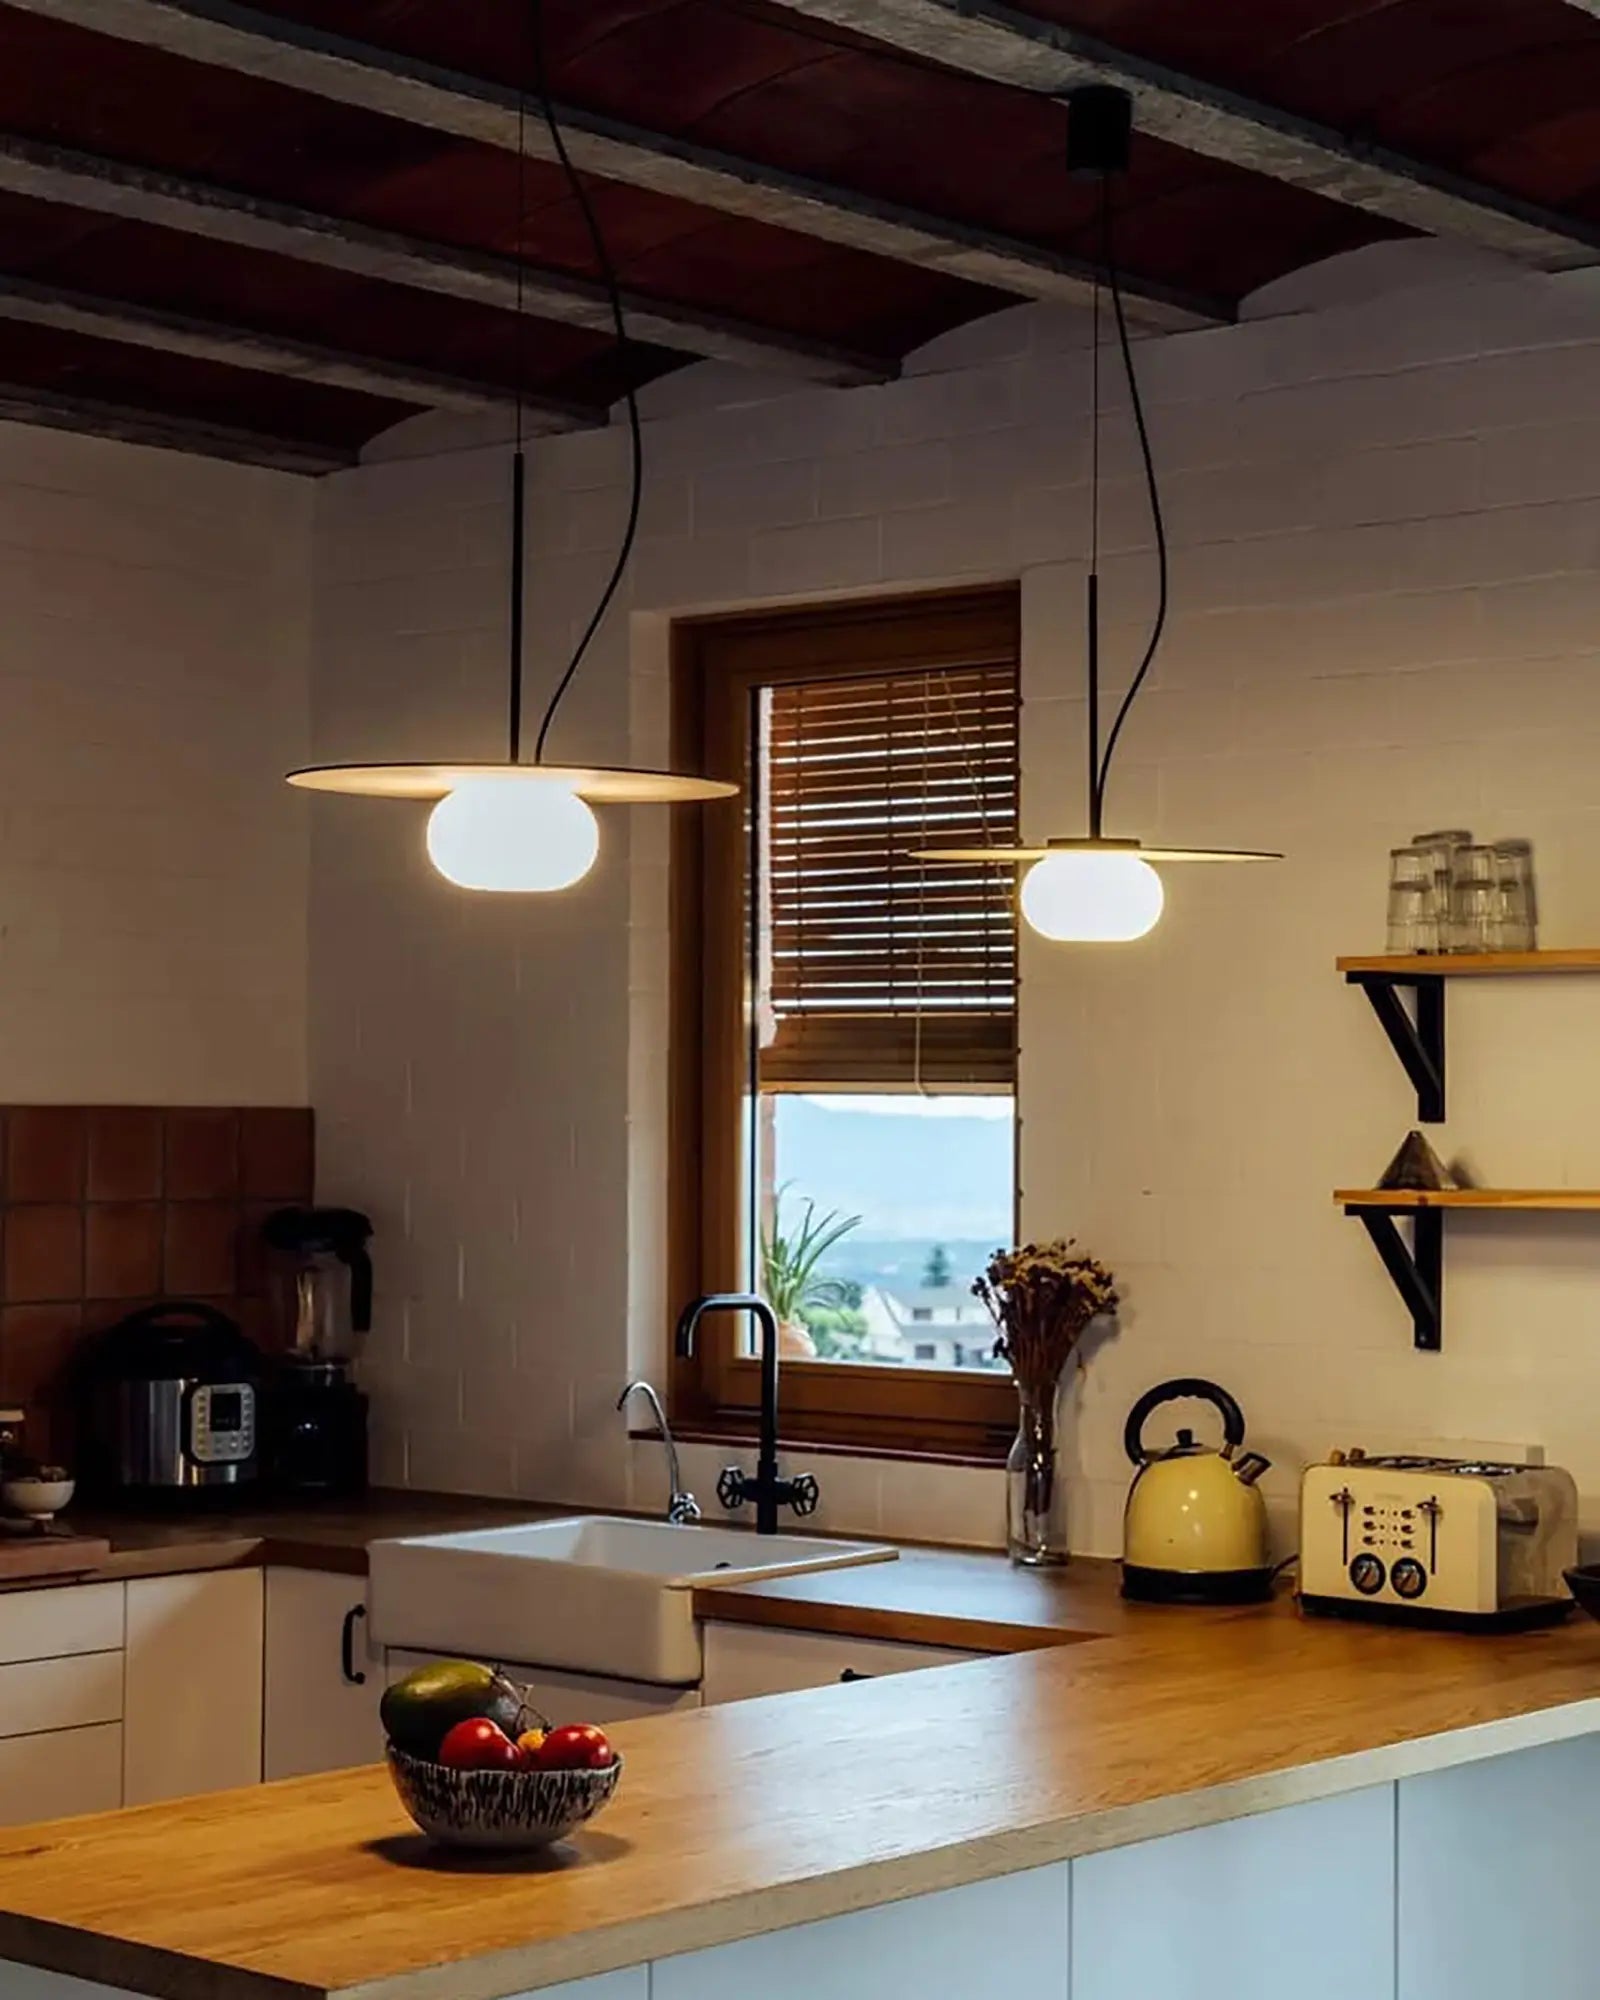 Knock pendant light cluster above a benchtop